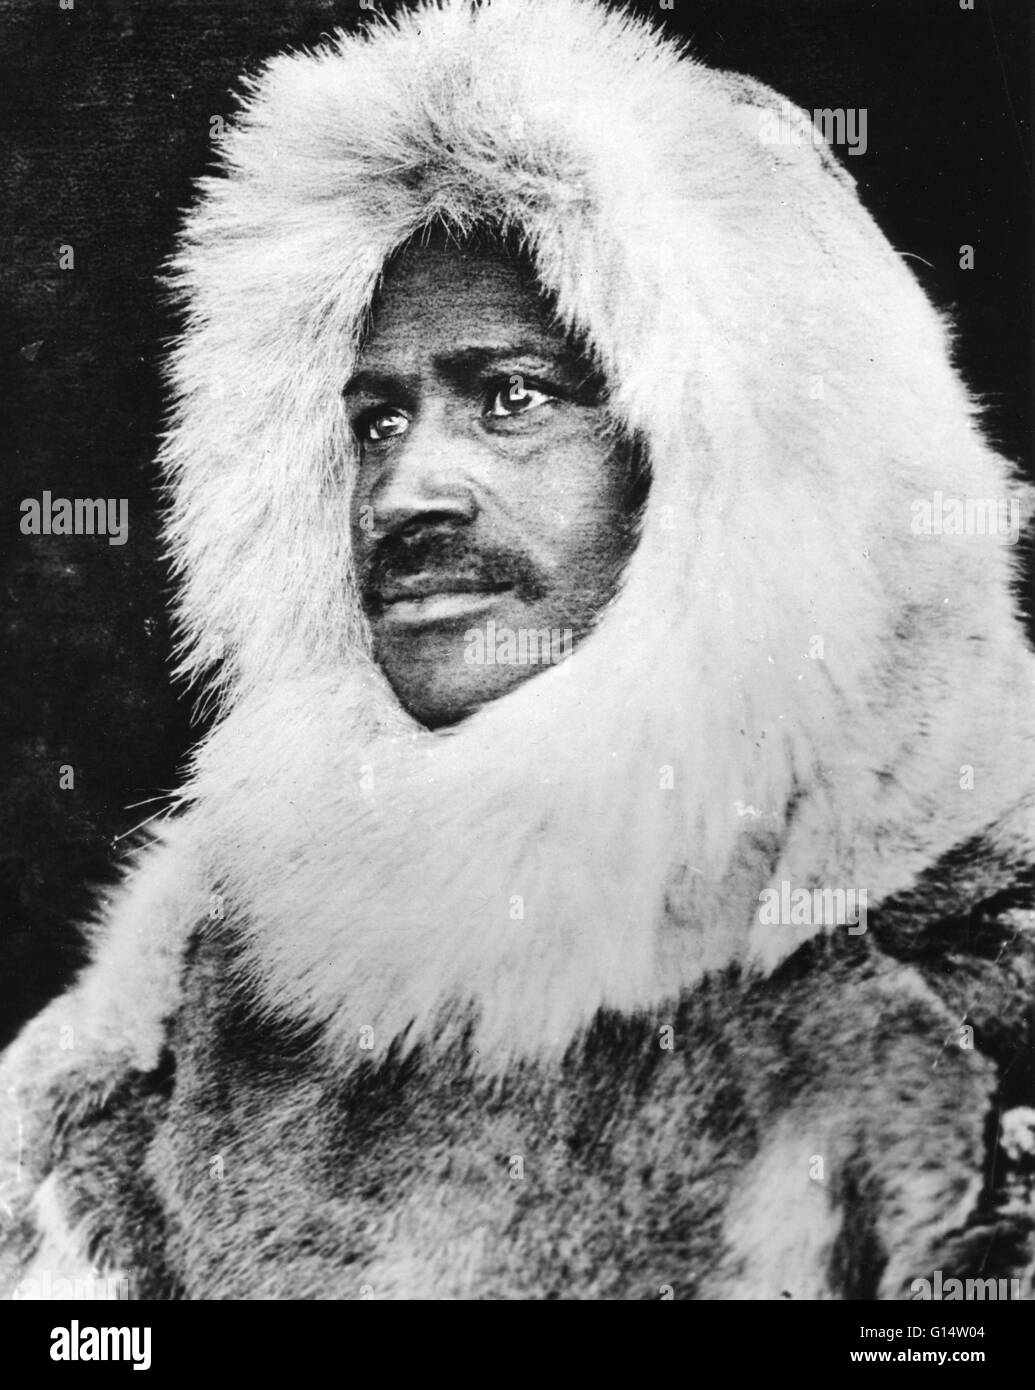 Matthew Henson, (1866-1955) Peary's companion, was the only other American besides Peary to reach the North Pole. All others were sent back by Peary before the North Pole was reached. Stock Photo